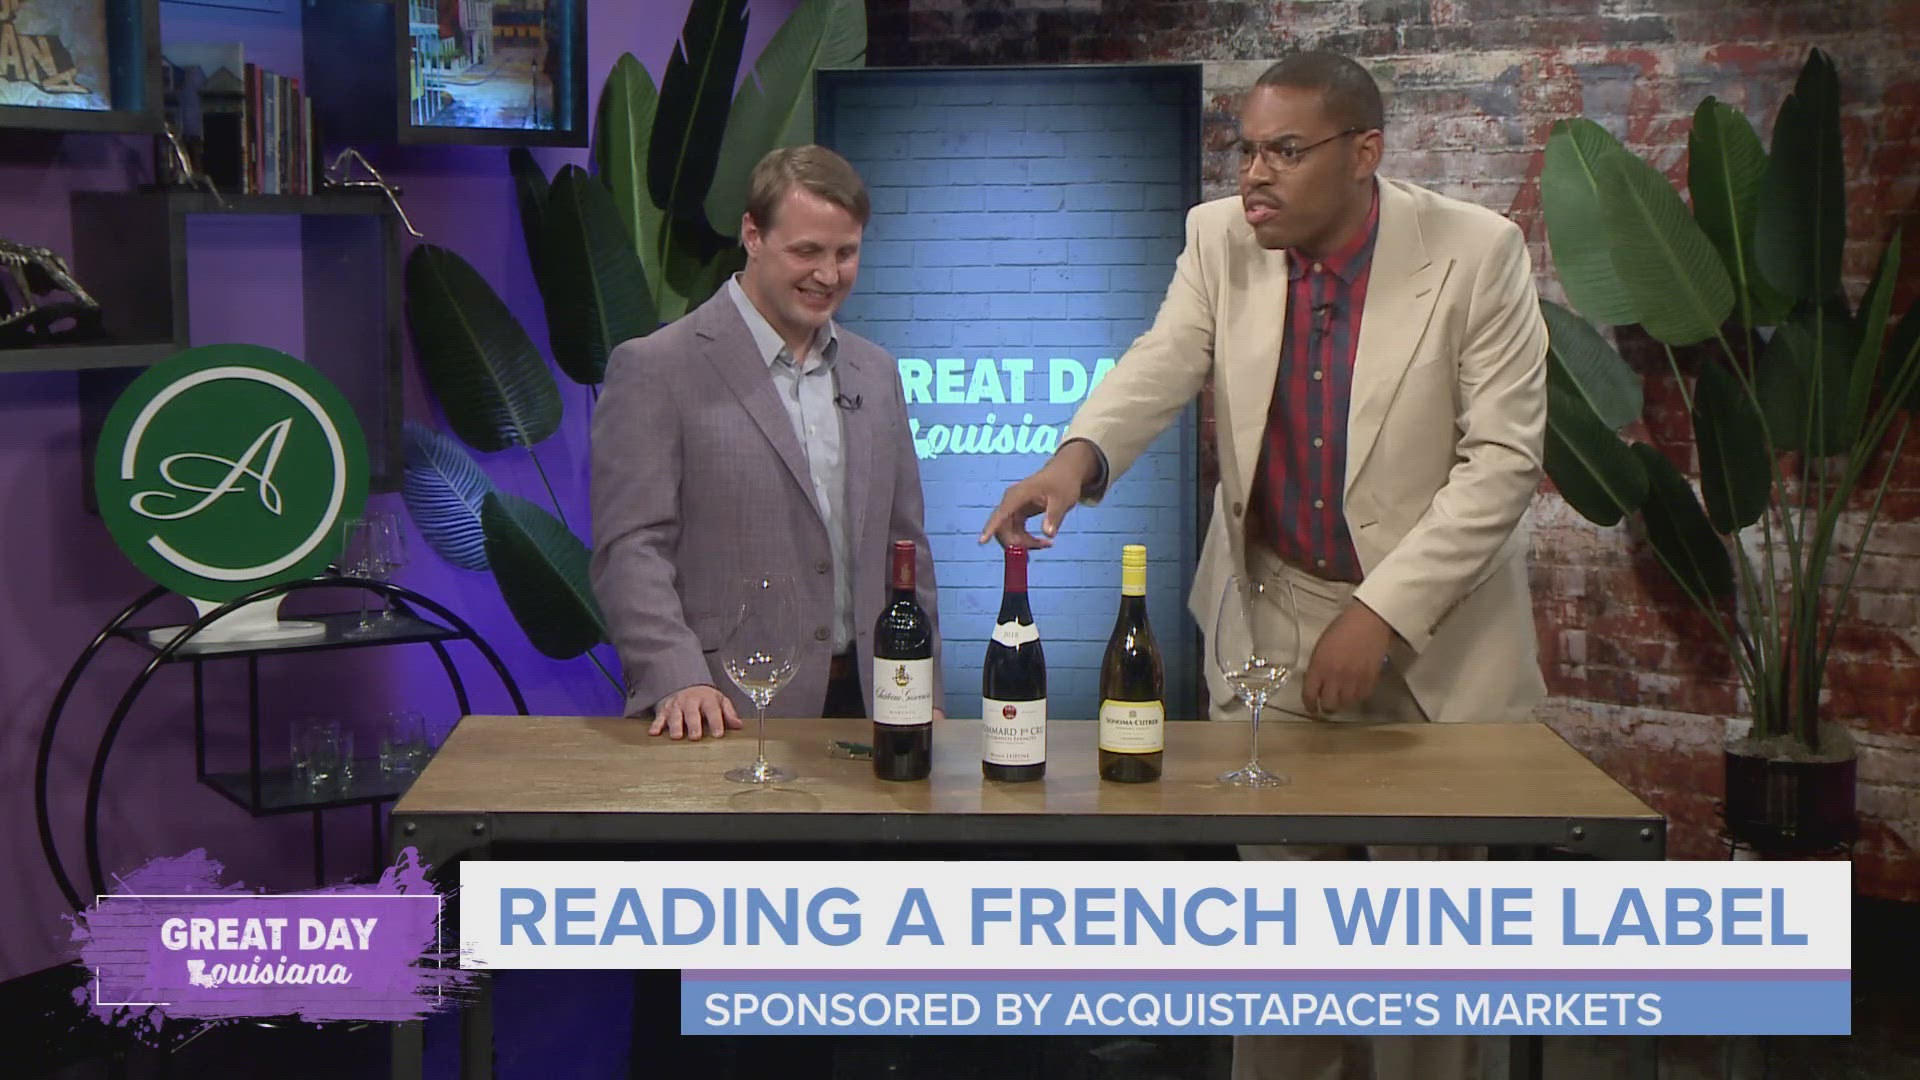 Learn the similarities and differences in reading wine labels from France and the U.S.